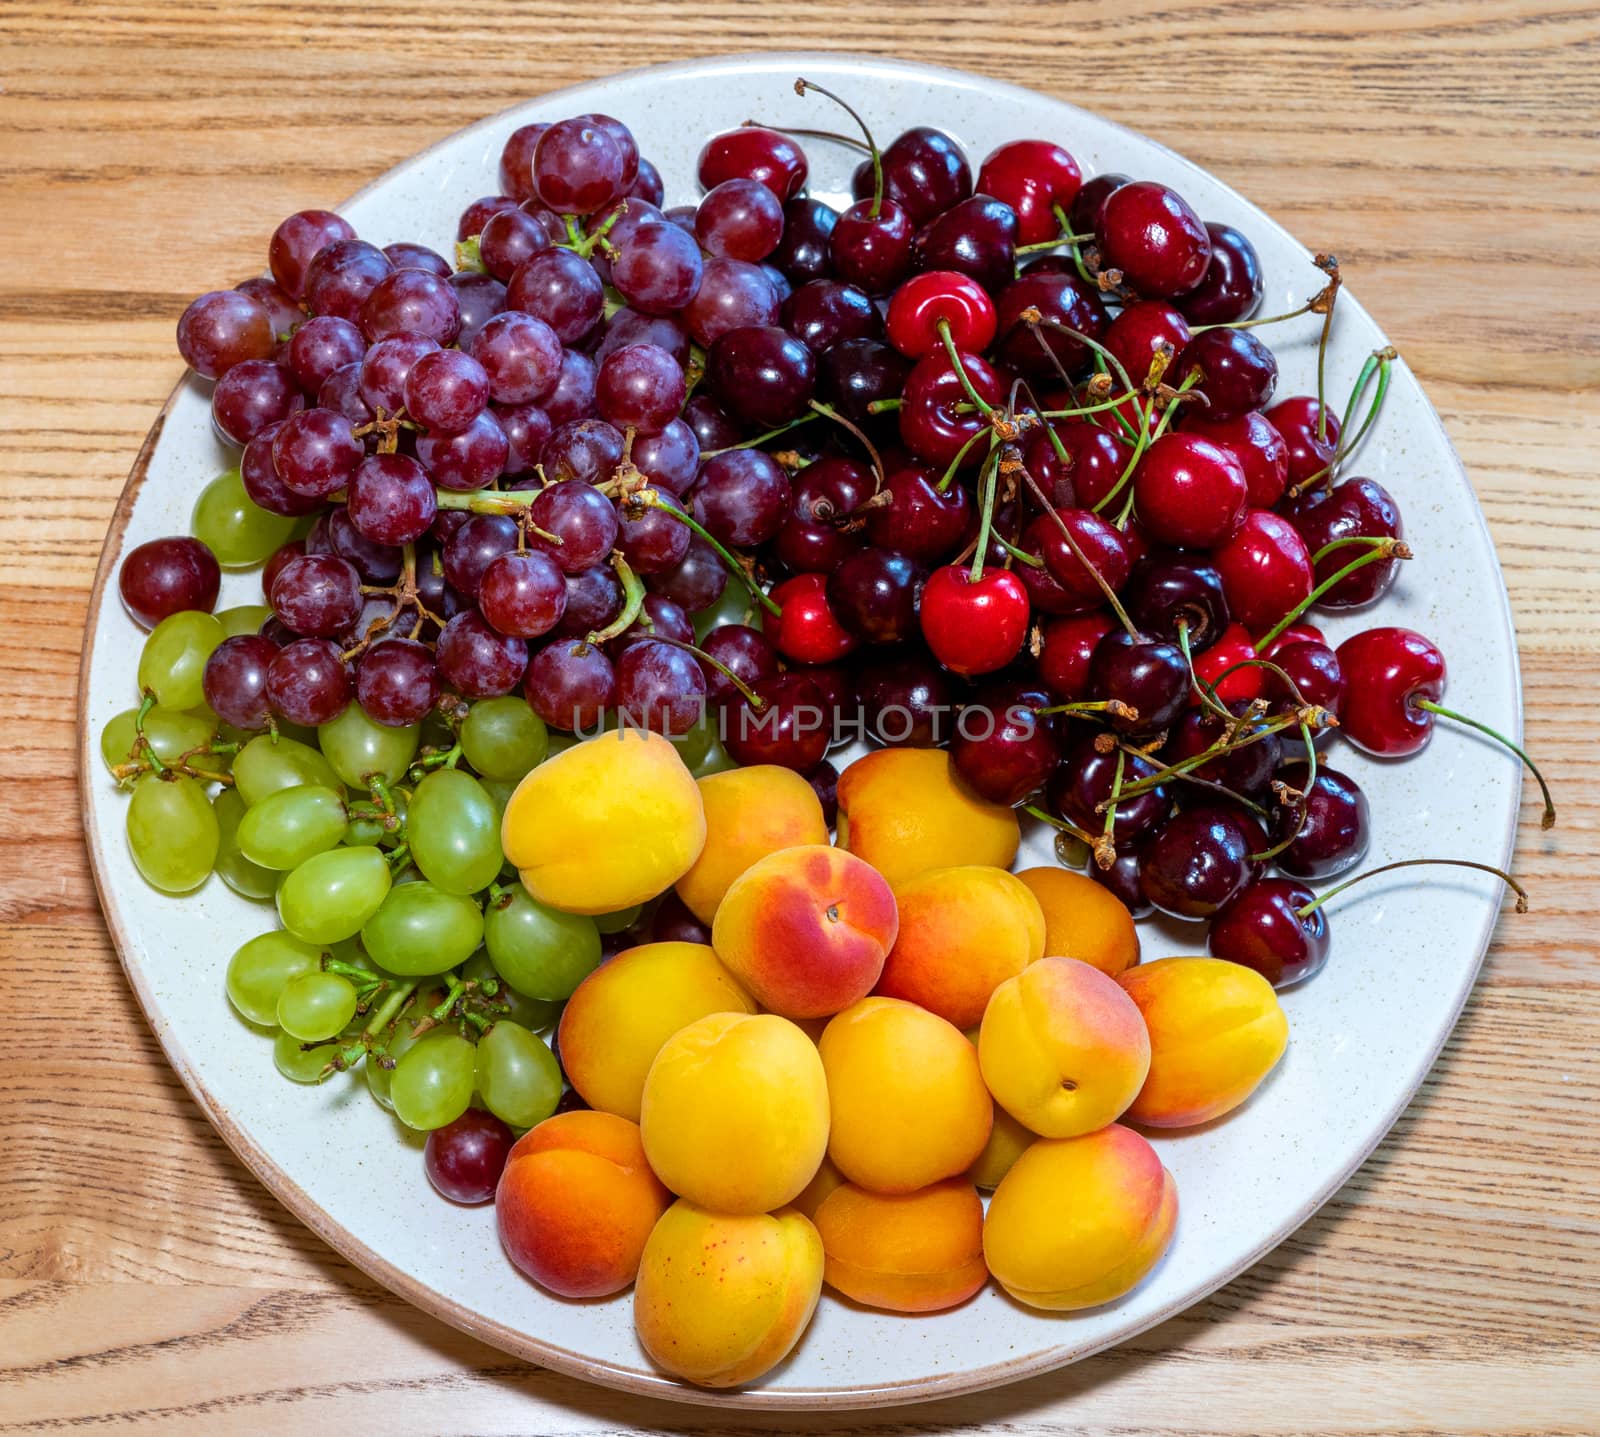 The plate with the fruit's sphysicists stands on the table. Ripe and Juicy Fruit